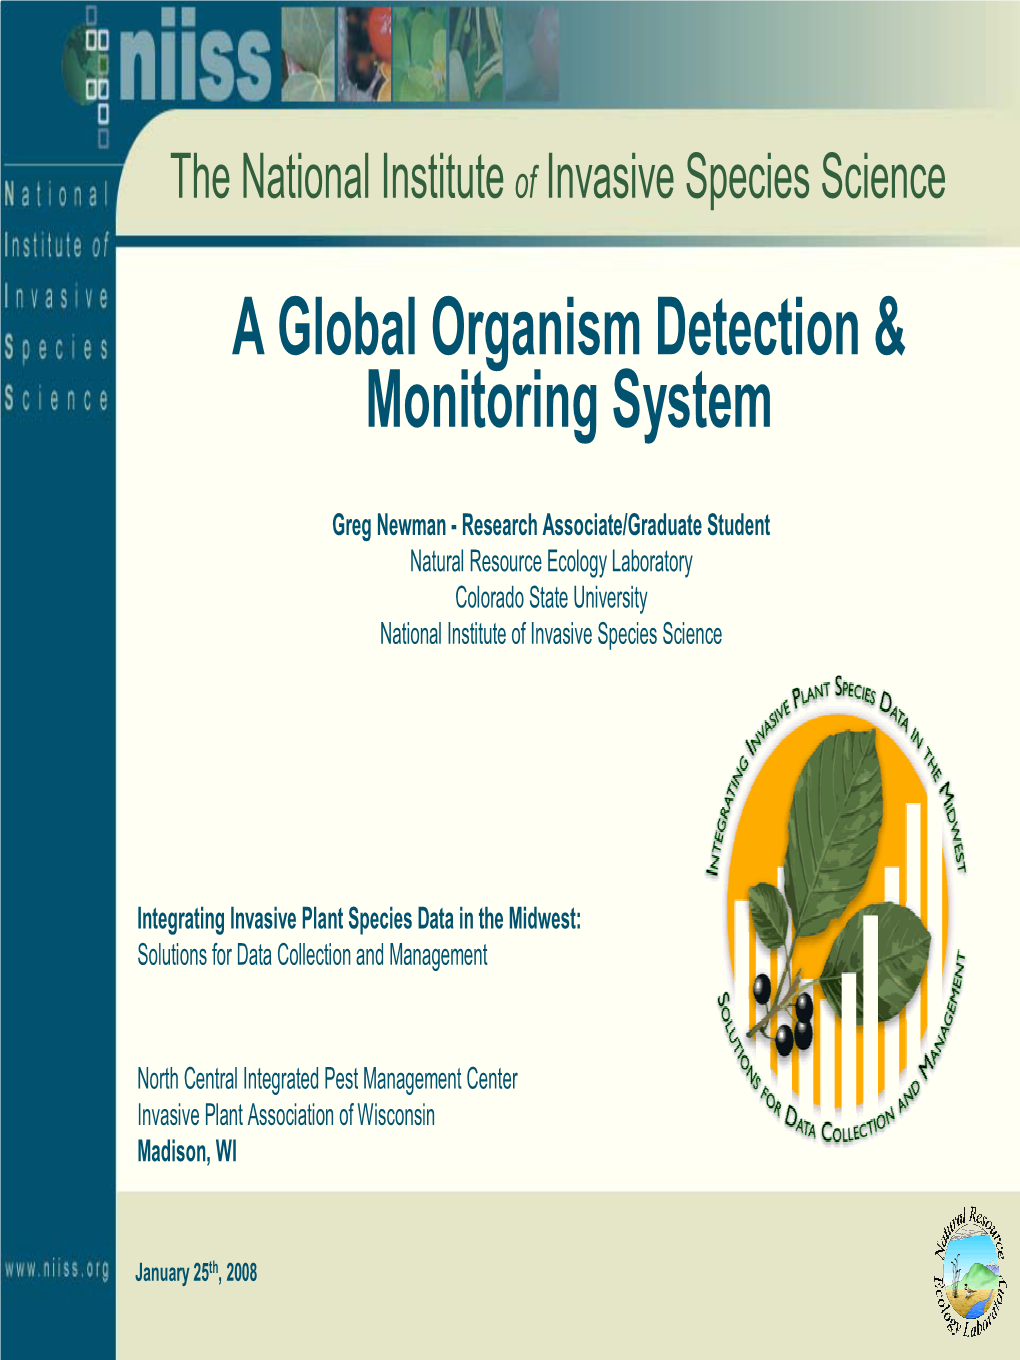 A Global Organism Detection & Monitoring System